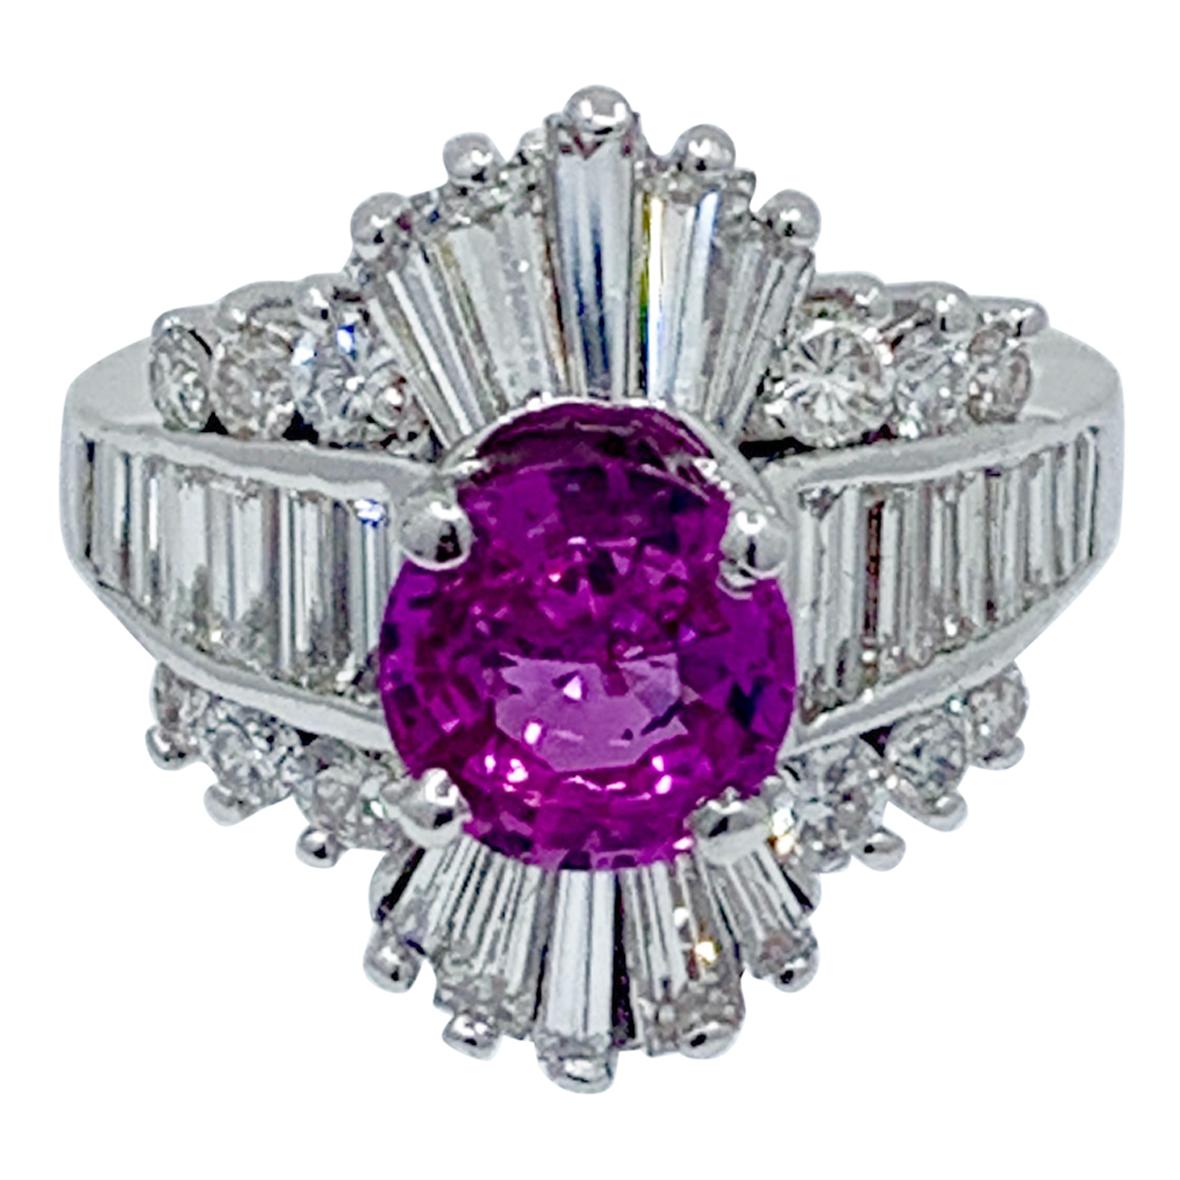 GIA Certified 4.35 Carat Vivid Pink Sapphire and Diamond Ballerina Cocktail Ring For Sale